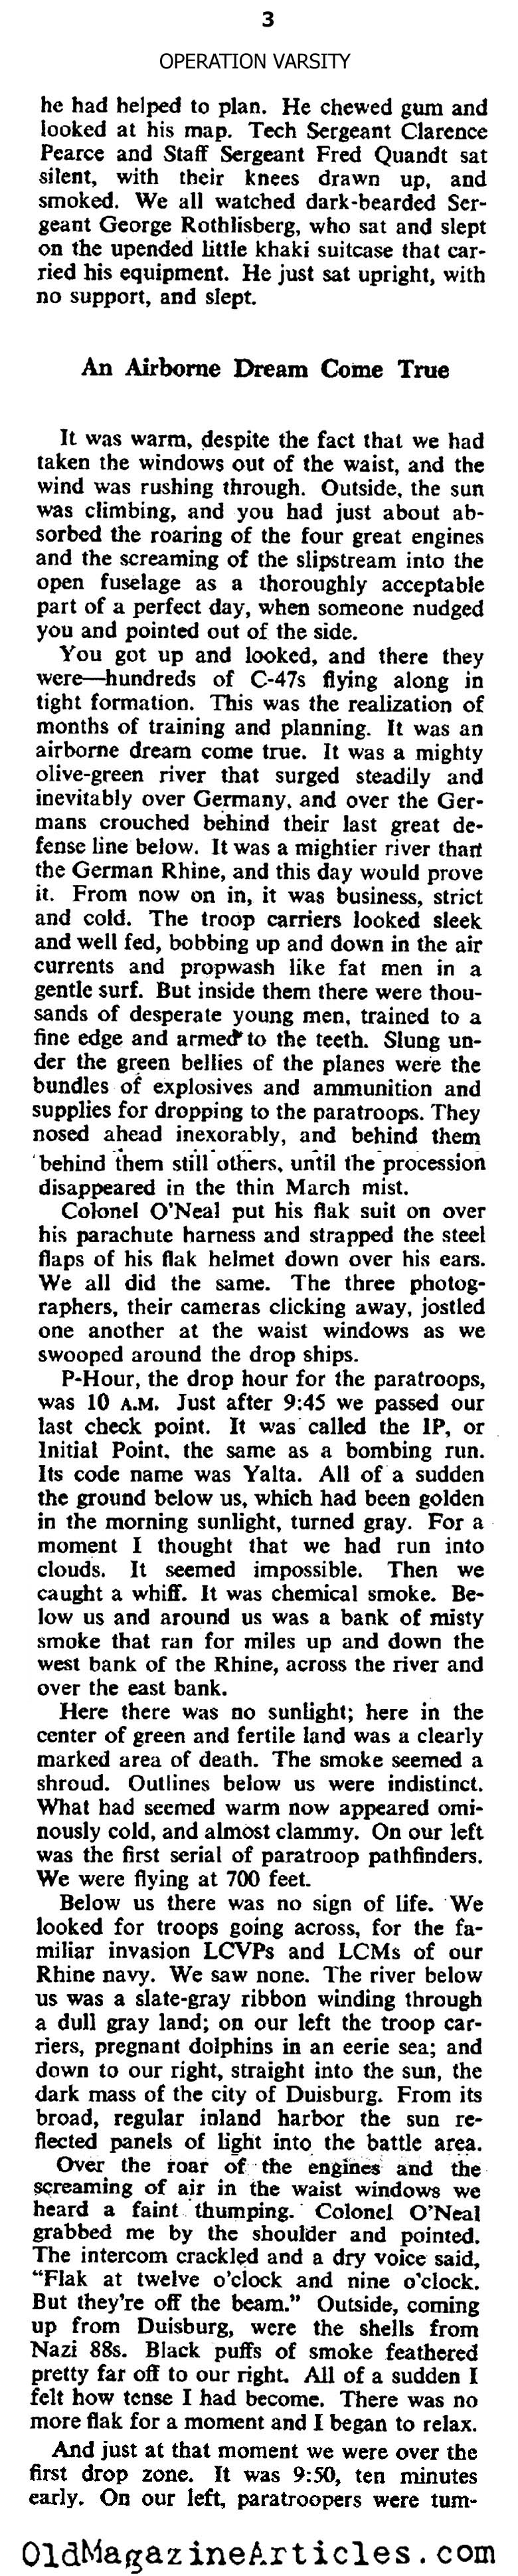 Operation Varsity: The Last Parachute Drop of the War (Collier's Magazine, 1945)